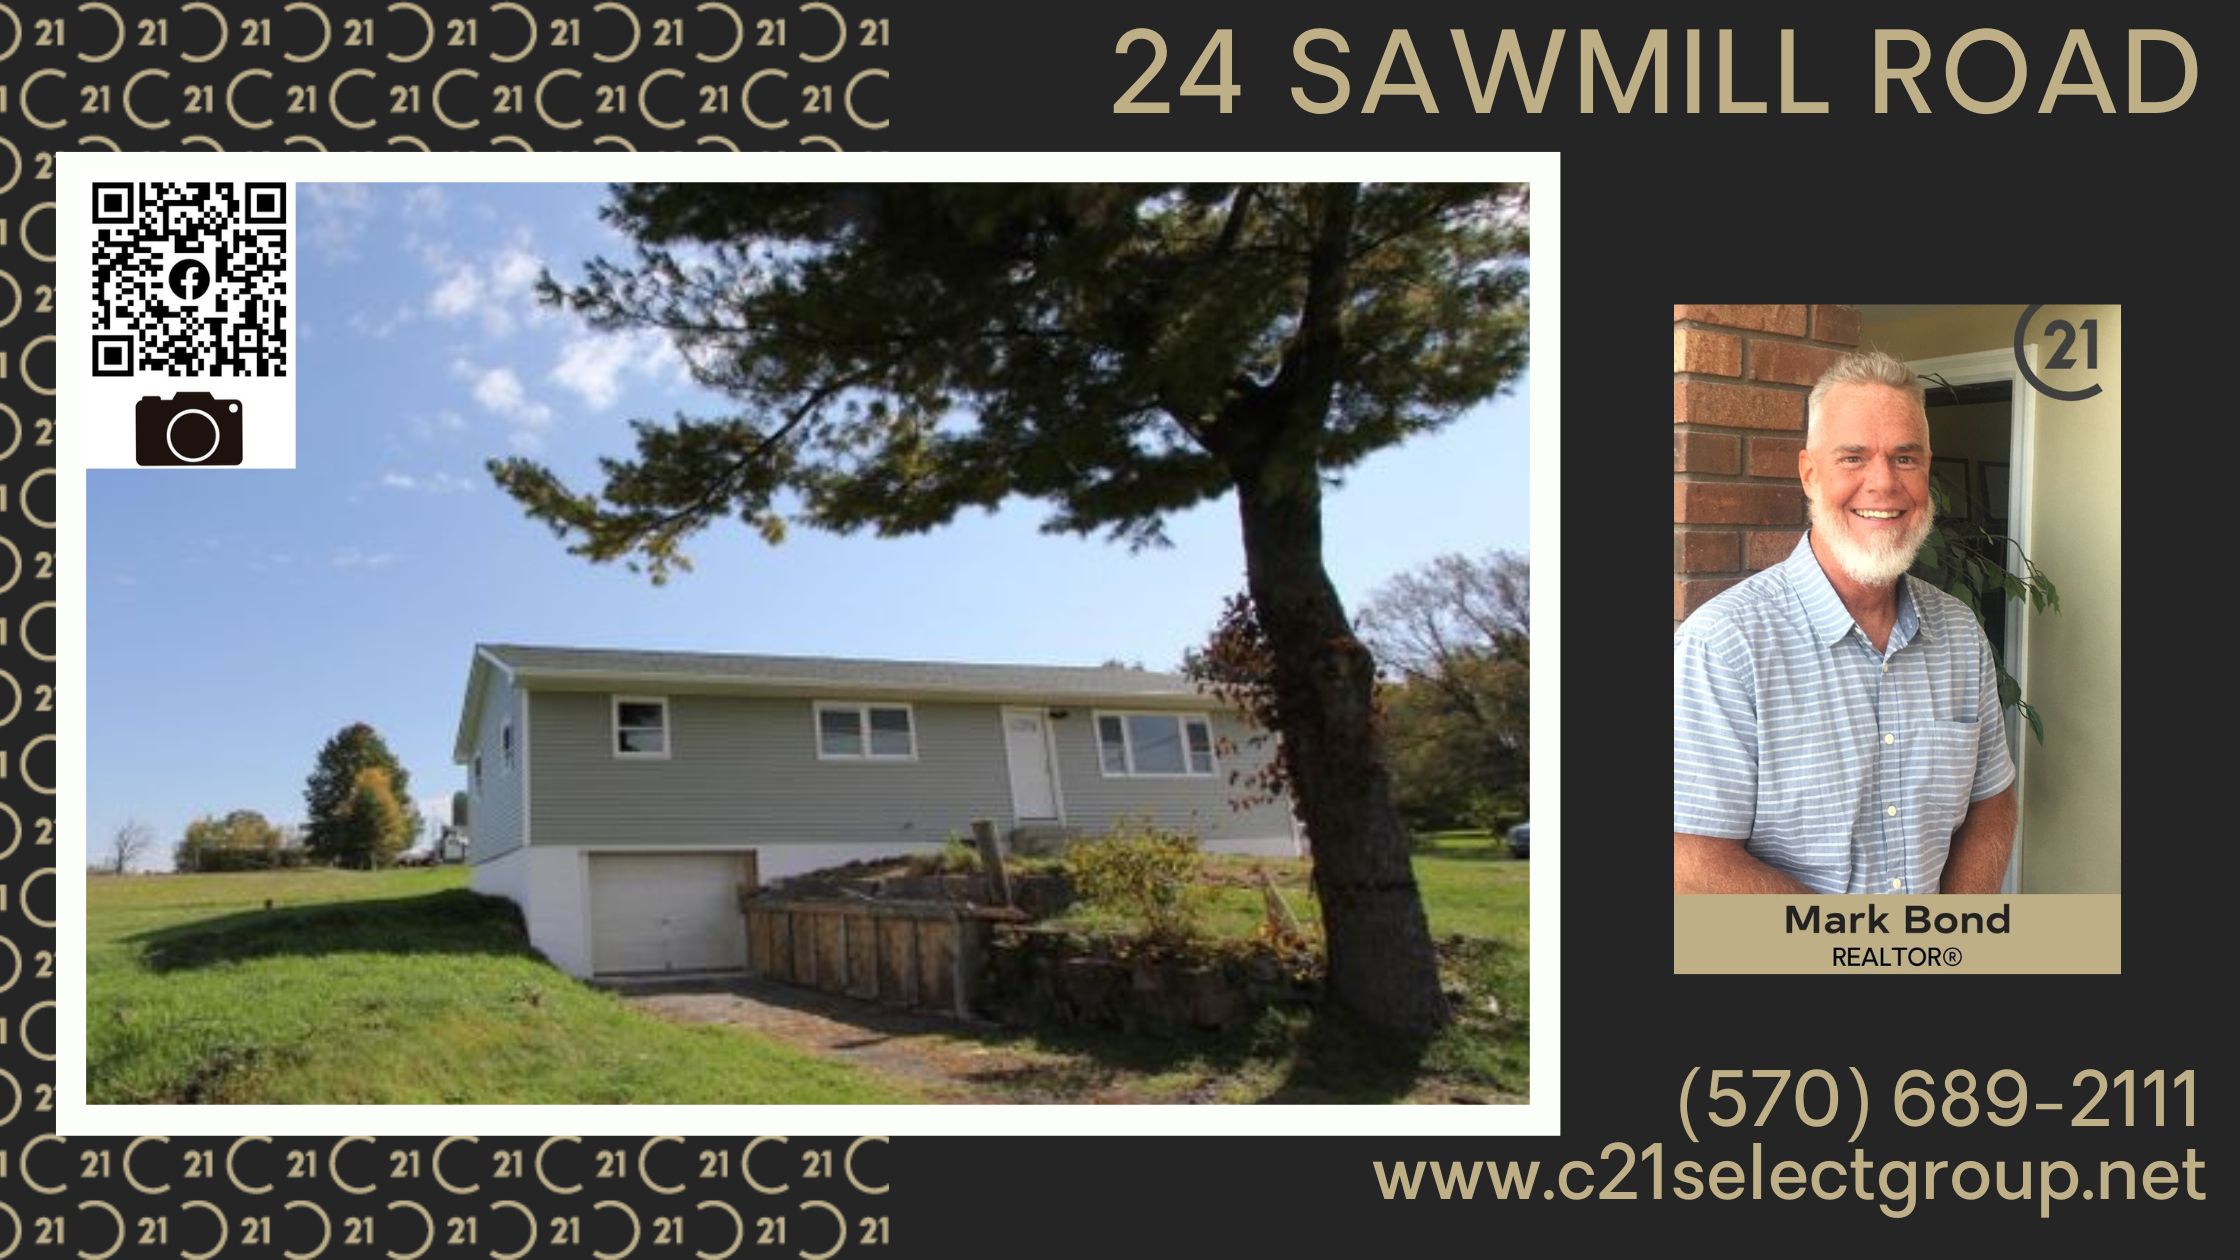 24 Sawmill Road: Remodeled Ranch on 1.08 Acres